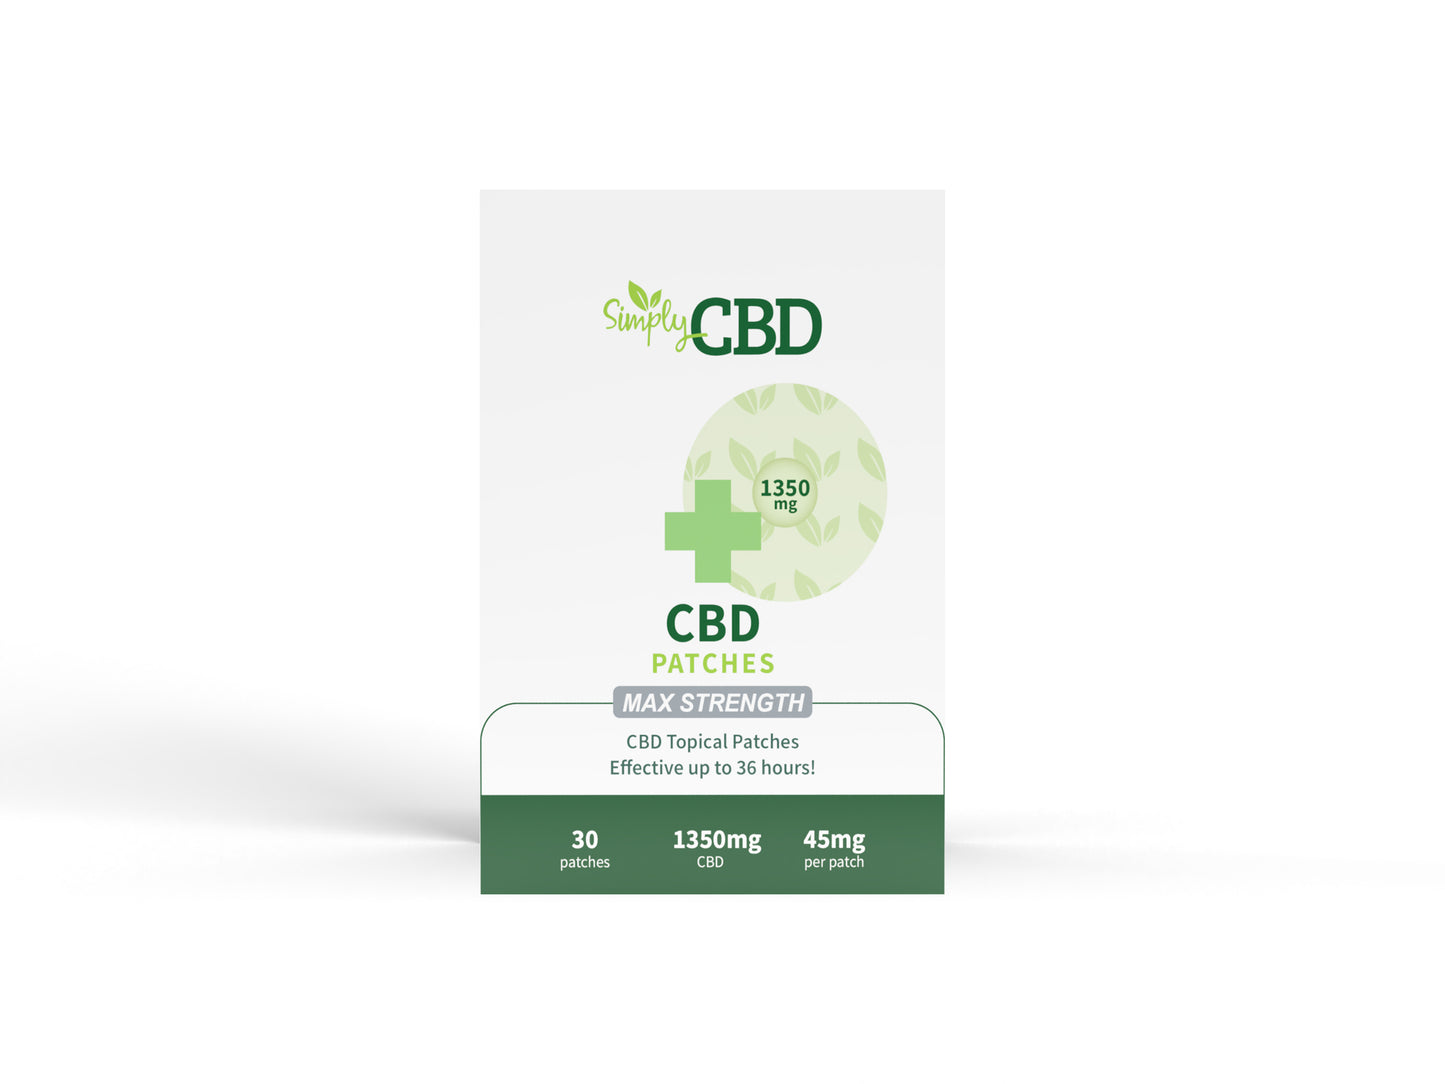 CBD Patches - 30 Patches - 45mg Per Patch (Max Strength) - Isolate